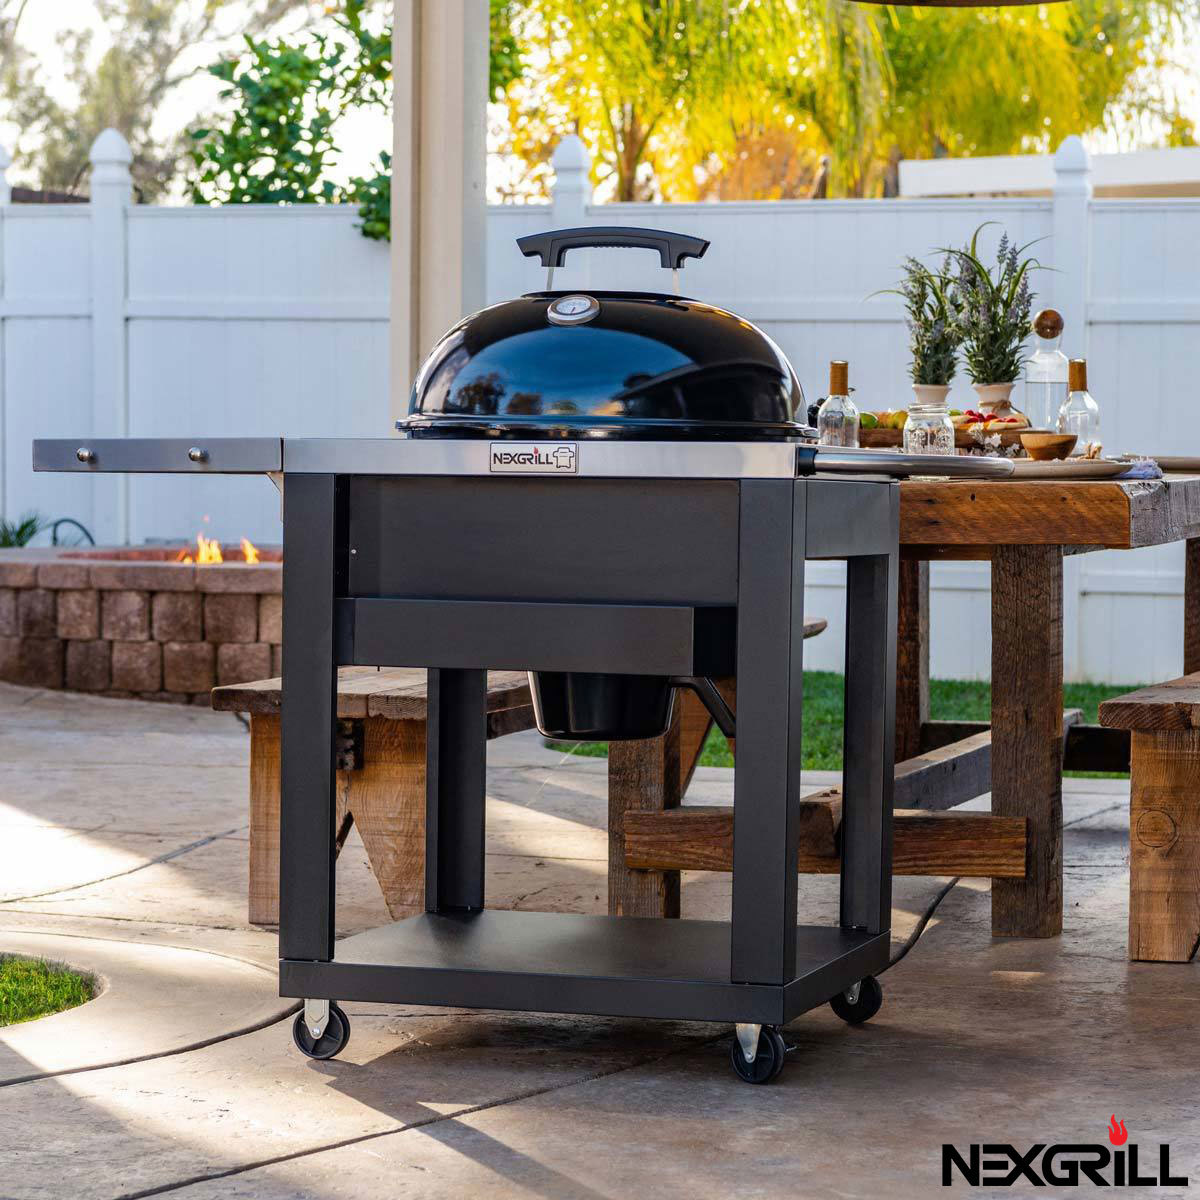 Nexgrill 22" (56 cm) Charcoal Kettle Barbecue With Cart